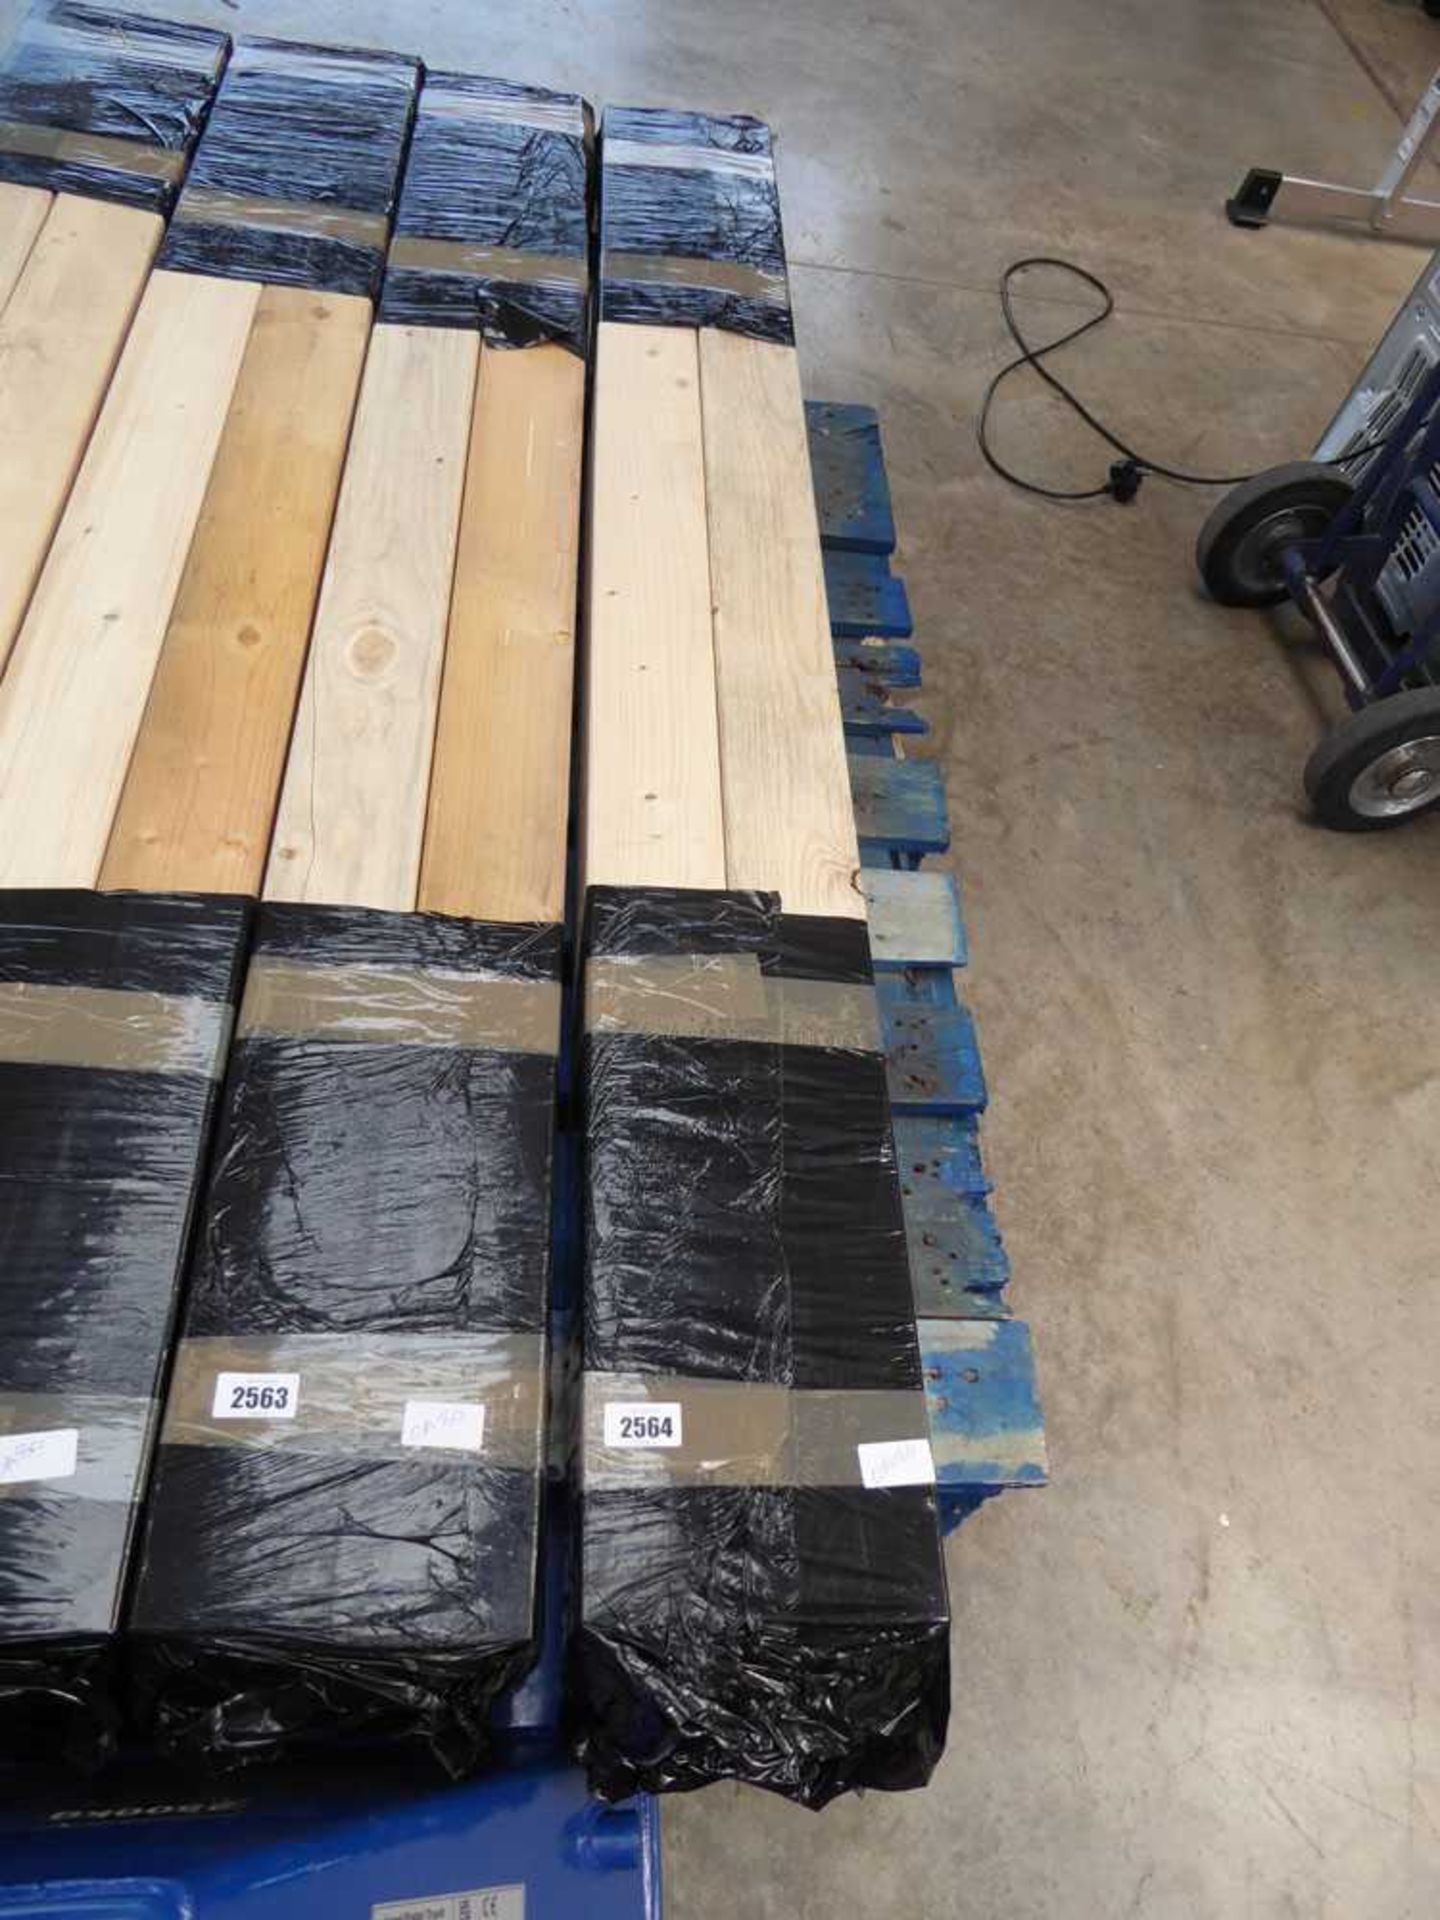 Bundle of 10 lengths of CLS timber